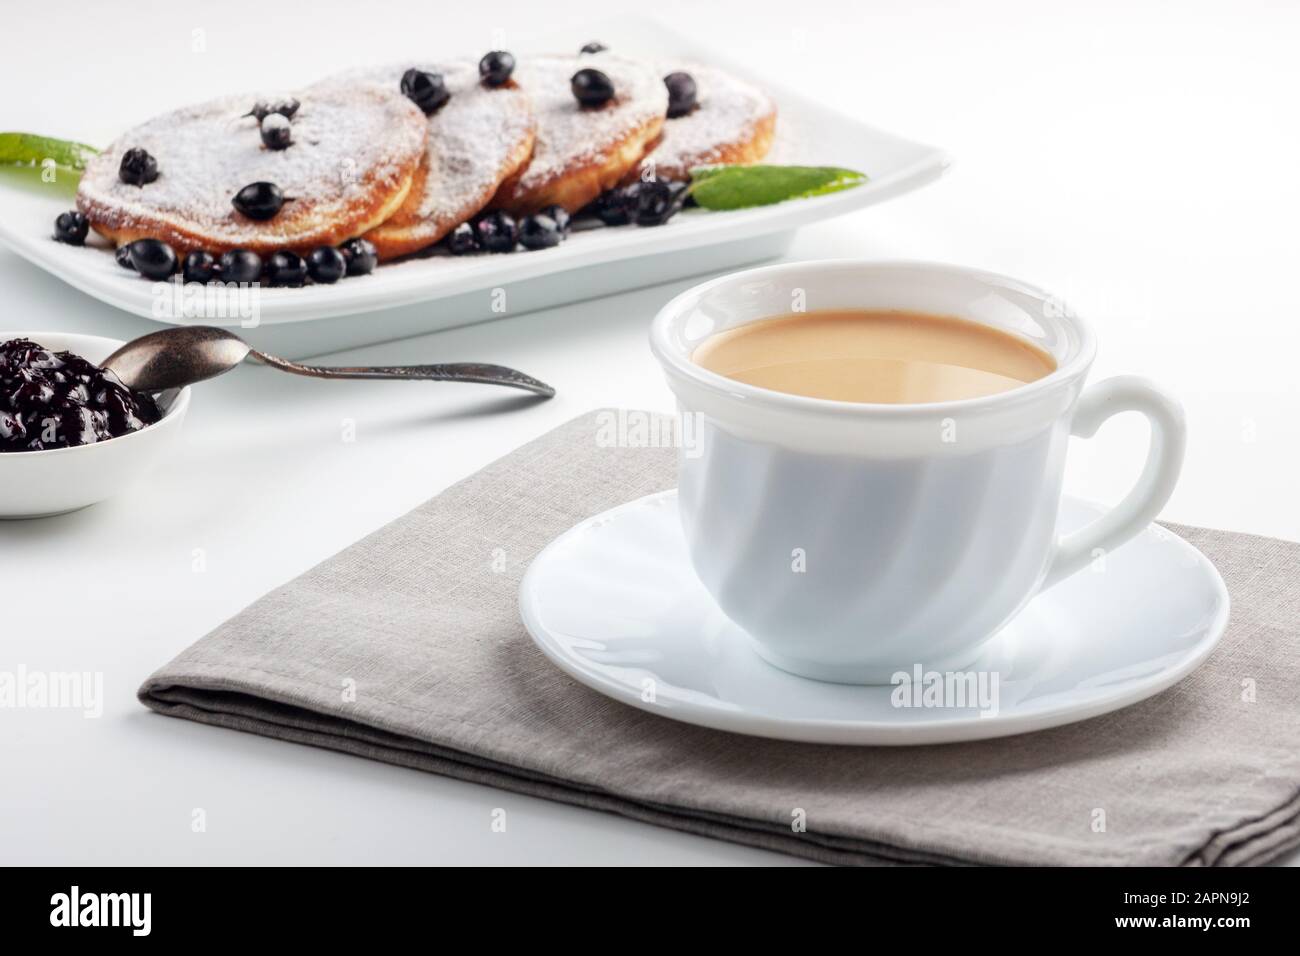 A Cup of coffee with milk and a plate with a pancakes is on the table. Stock Photo